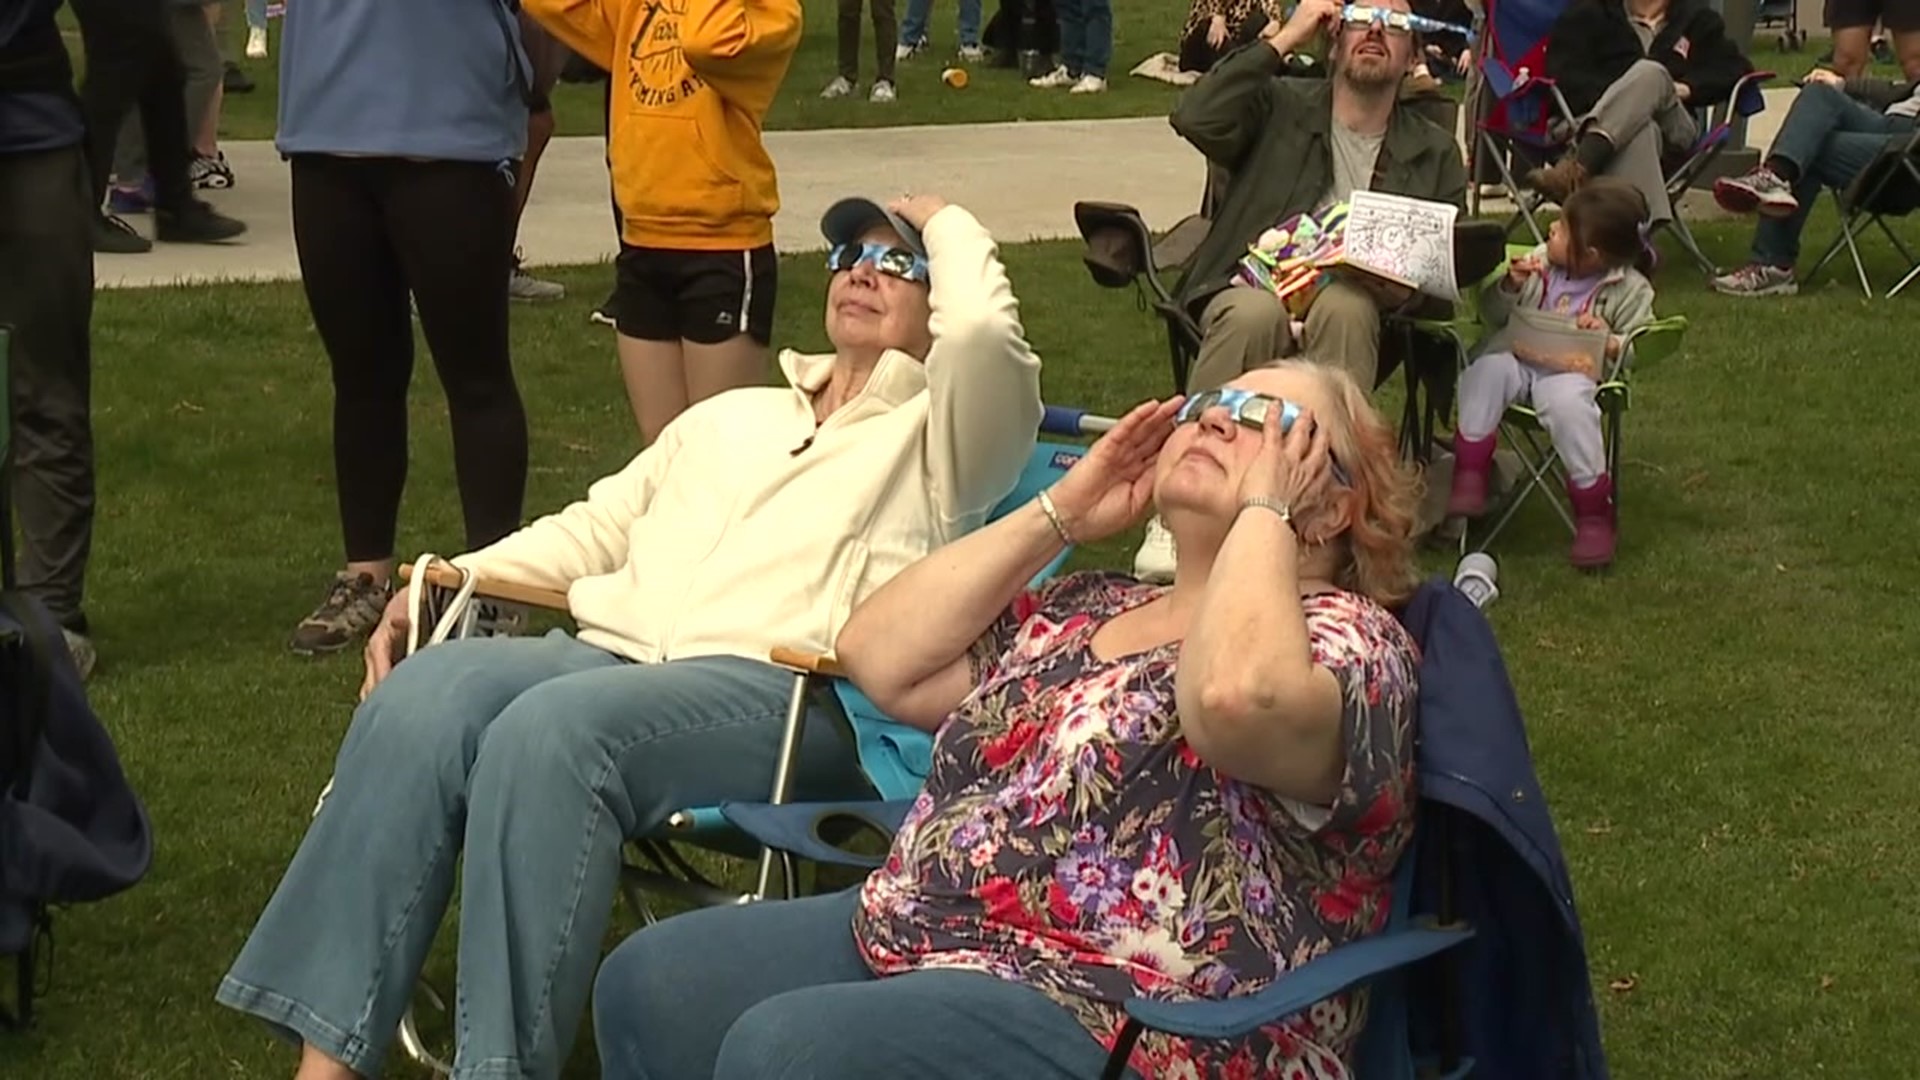 We didn't have totality of the eclipse in our area, but we got pretty close. Thousands came to one campus in Luzerne County to see it.